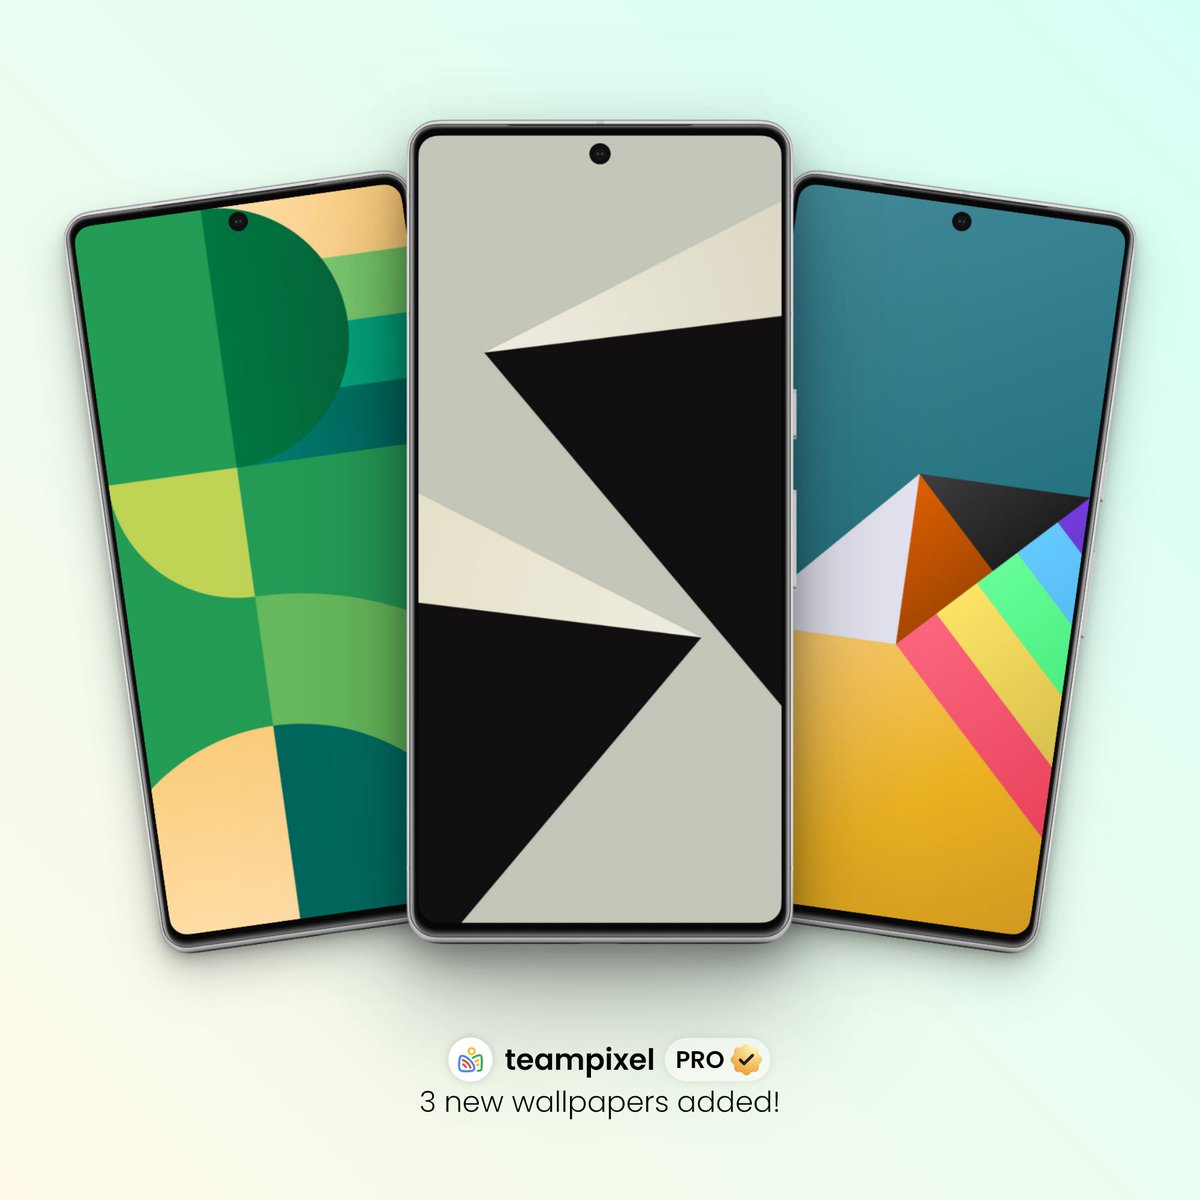 New TeamPixel PRO Wallpapers! 🚀😍

❤️ 3 New Wallpapers Added
🌟 Total 1200+ Pixel Style Wallpapers

✅ Download #TeamPixel
→   bit.ly/teampixelwalls 

#android #trending #wallpapers #pixel9 #pixel8a